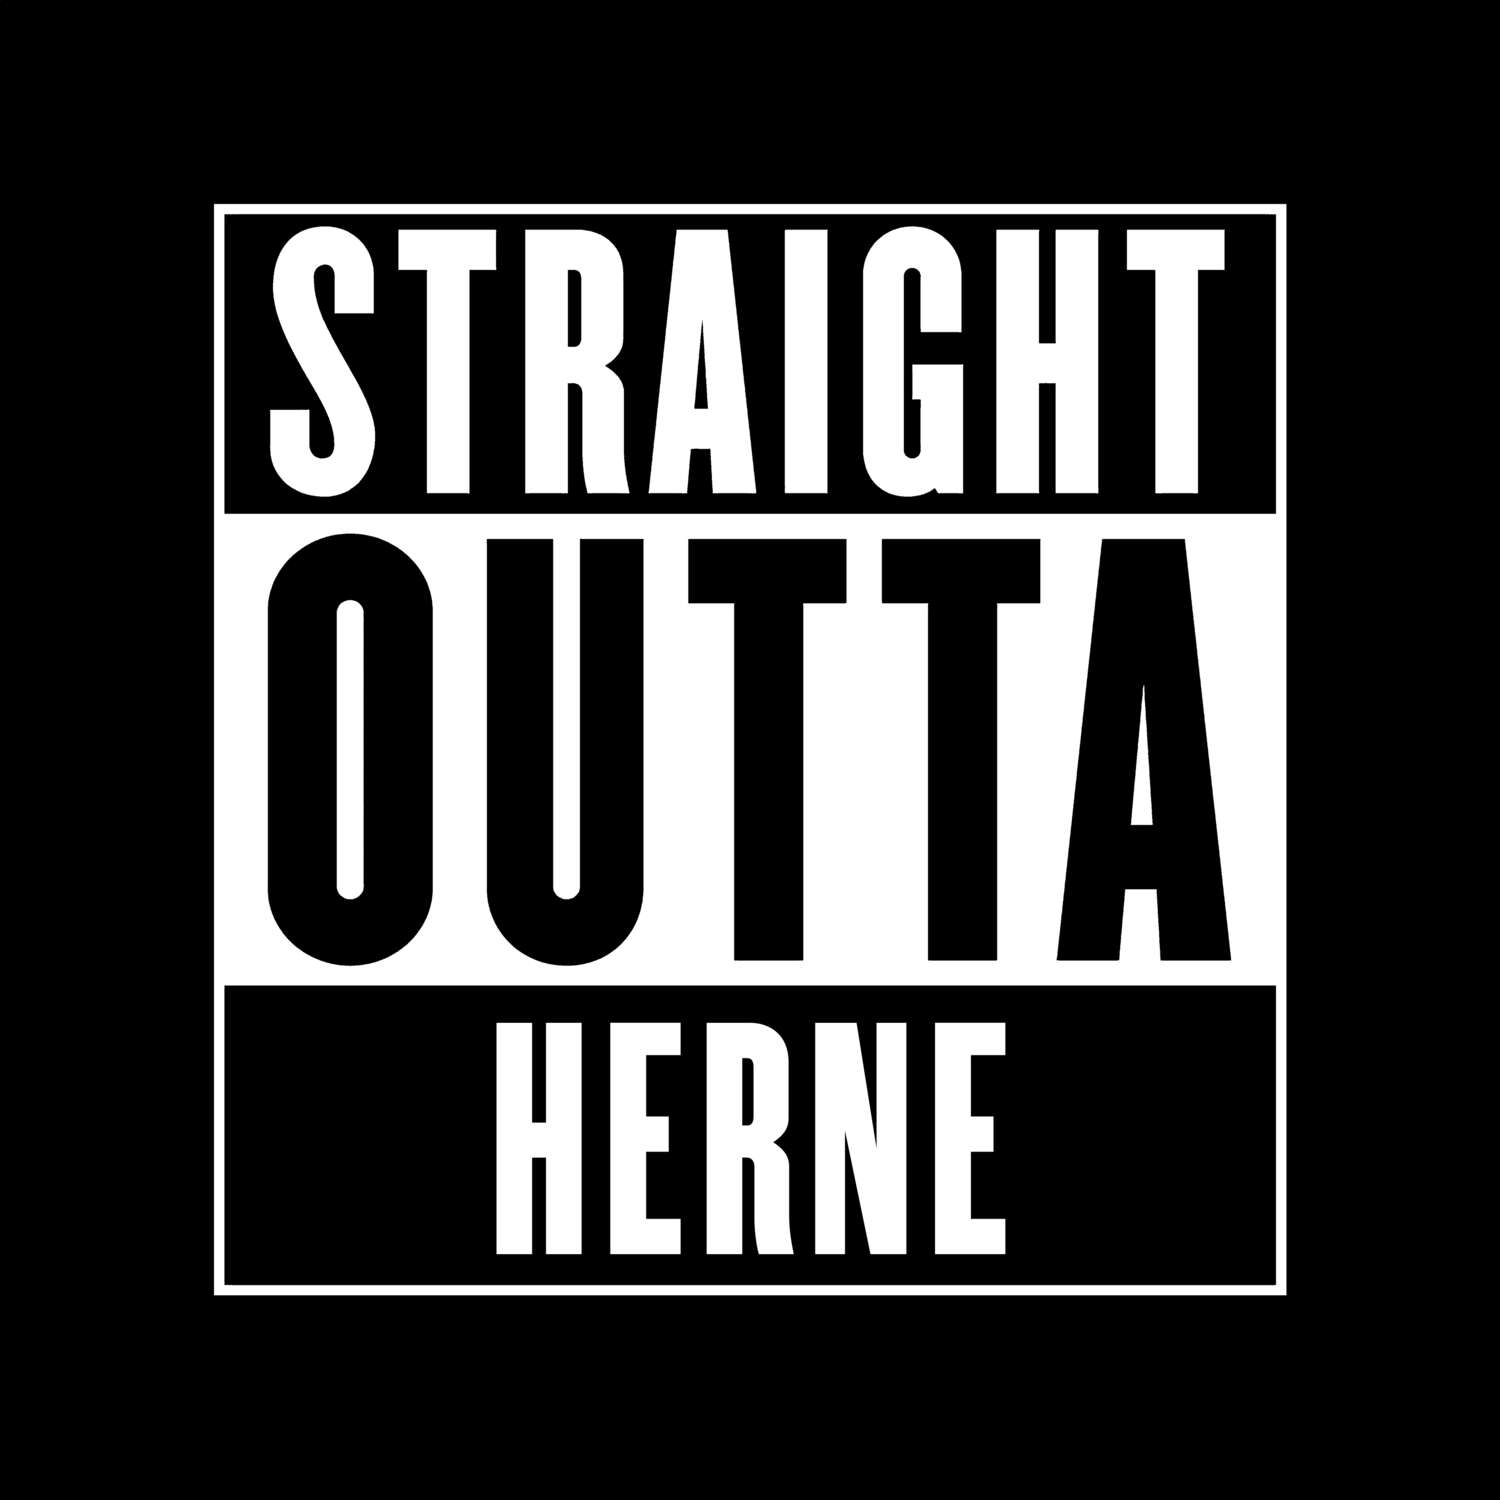 Herne T-Shirt »Straight Outta«